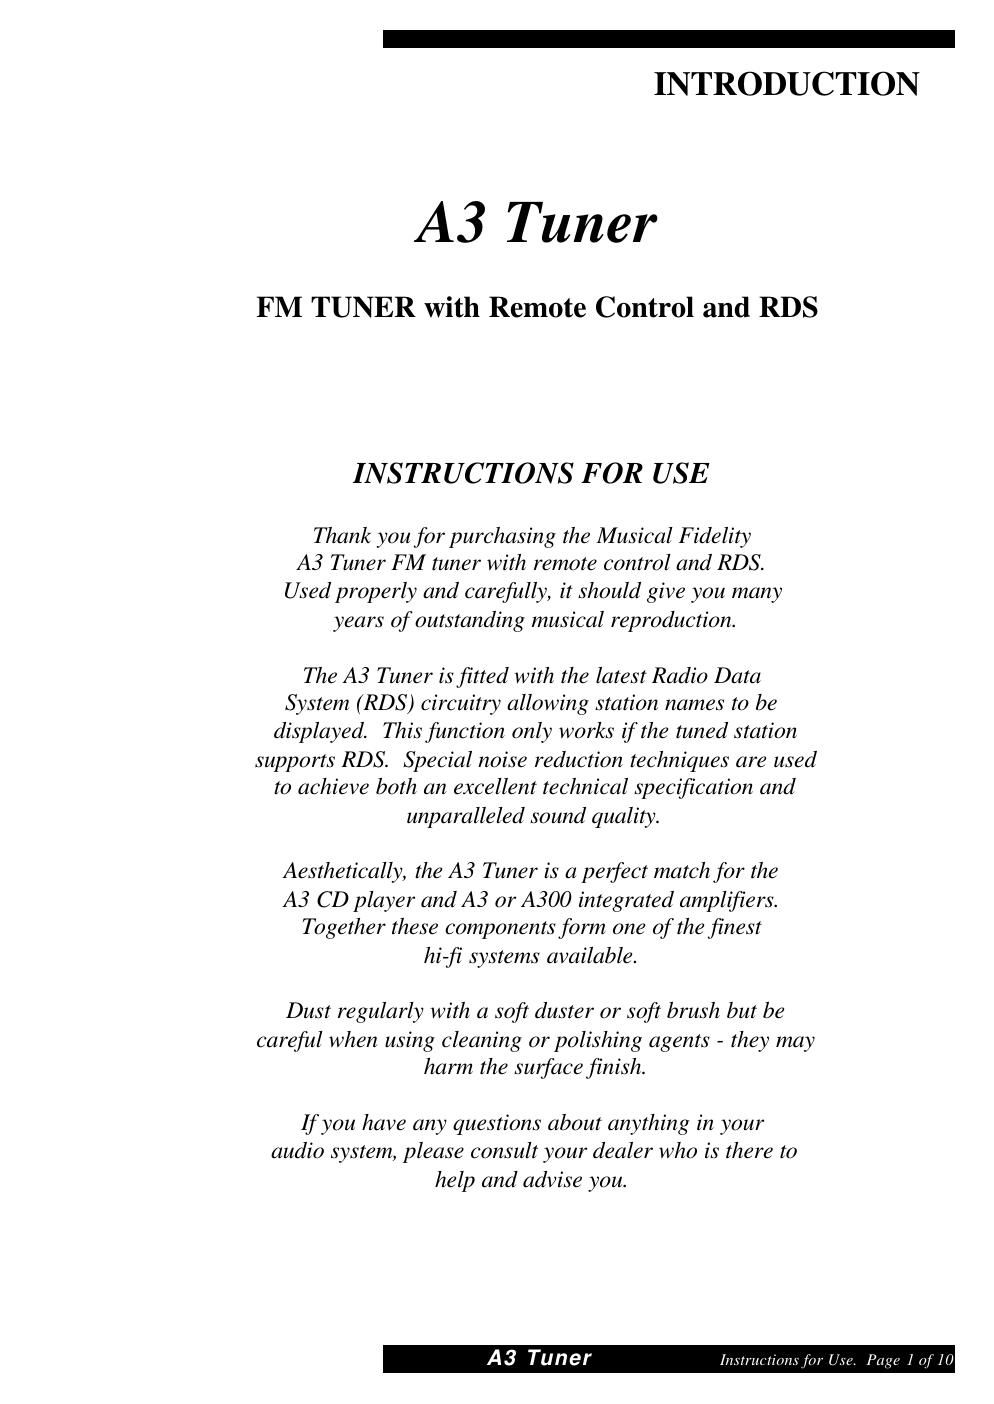 musical fidelity a 3 tuner owners manual